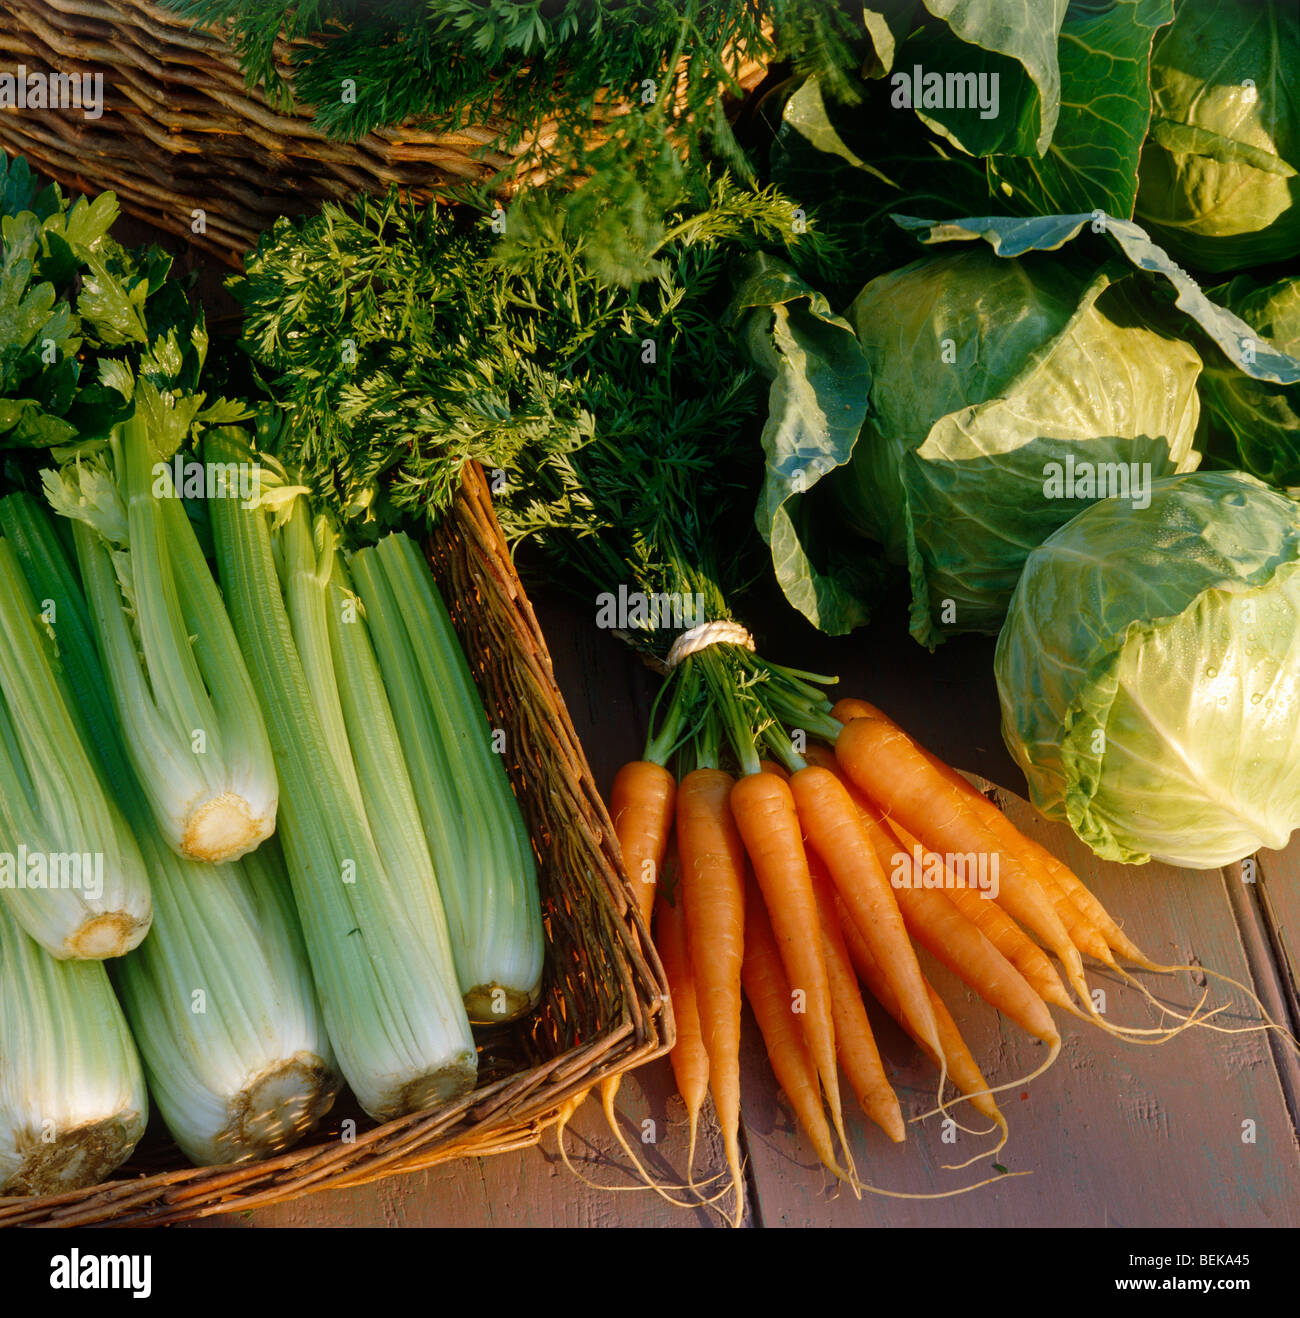 Still life of different vegetables Stock Photo